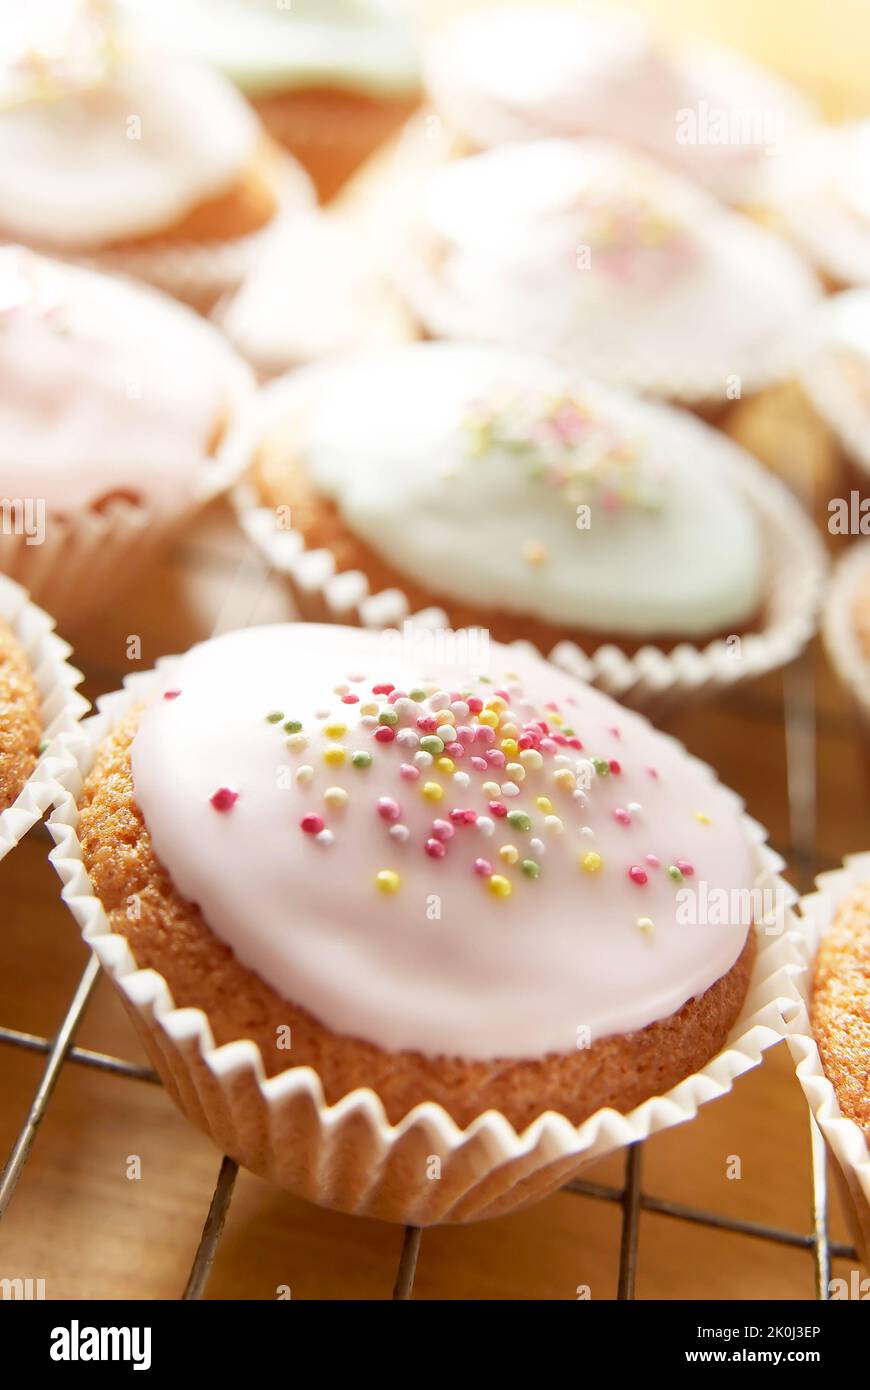 Variety of cupcakes on a cooling tray Stock Photo